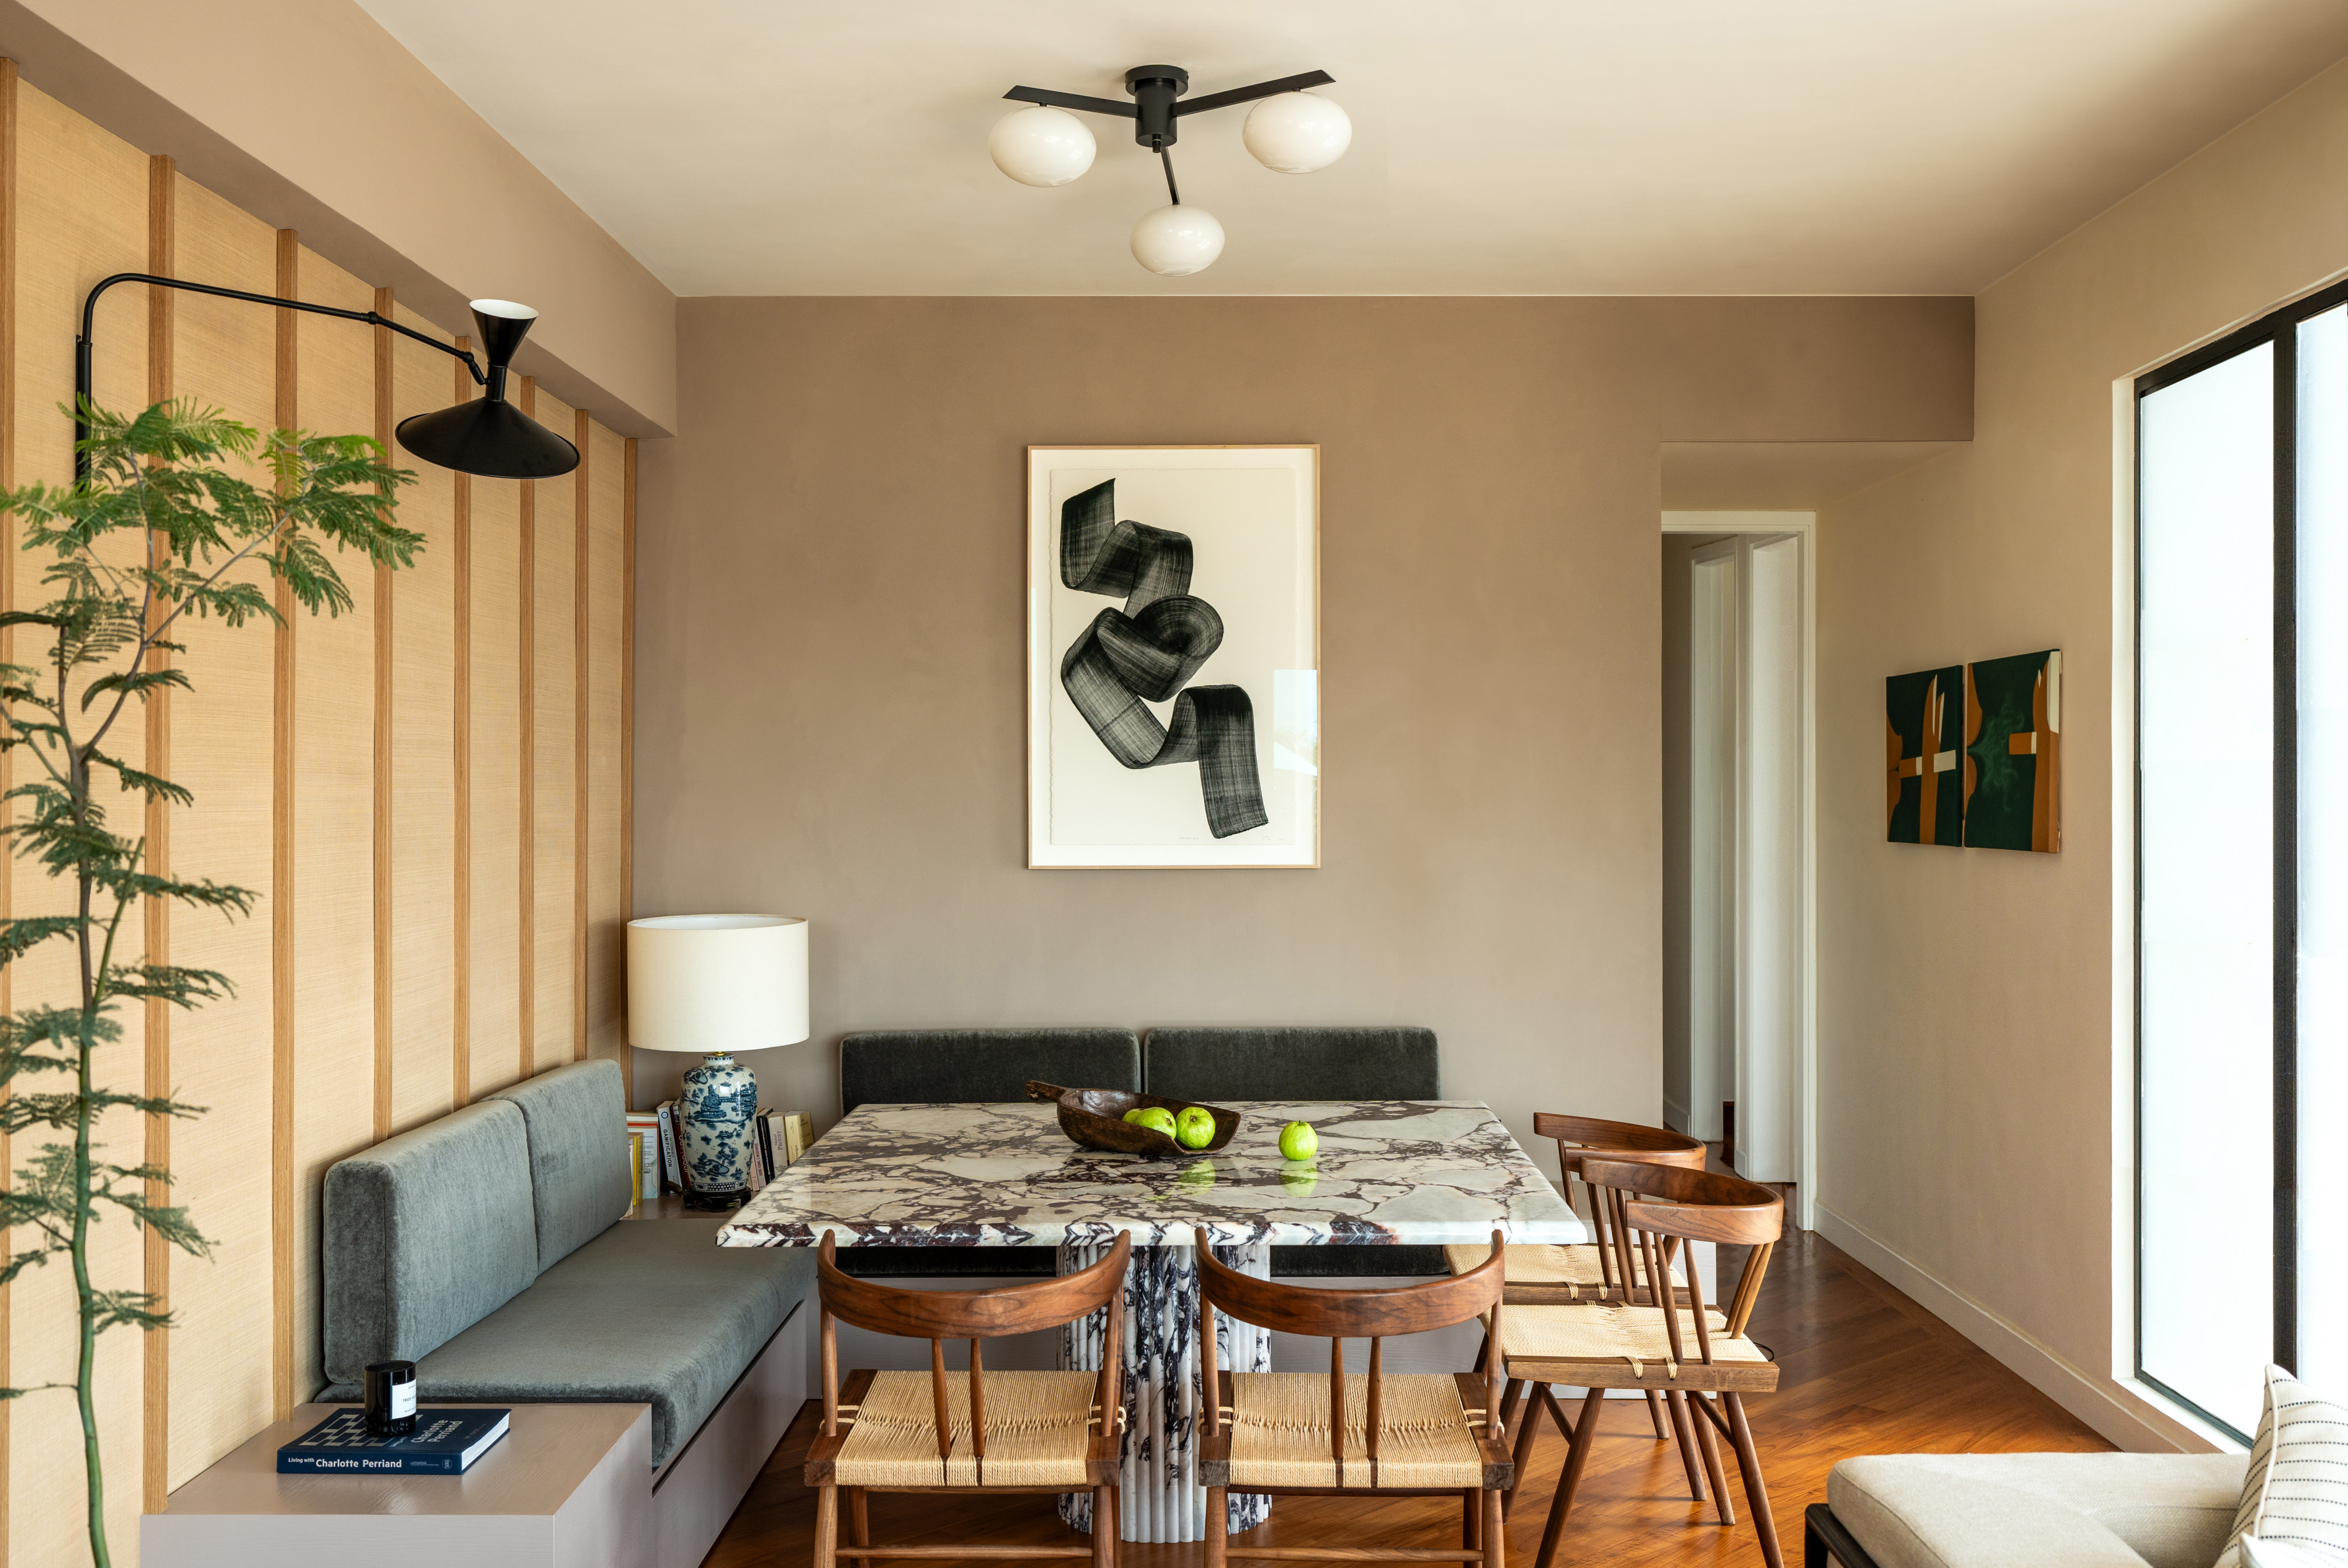 The dining room of a redecorated rental flat in Mid-Levels. Clever take-with-you design details can transform bland rented flats into distinctive homes. Photo: Lit Ma for Common Studio